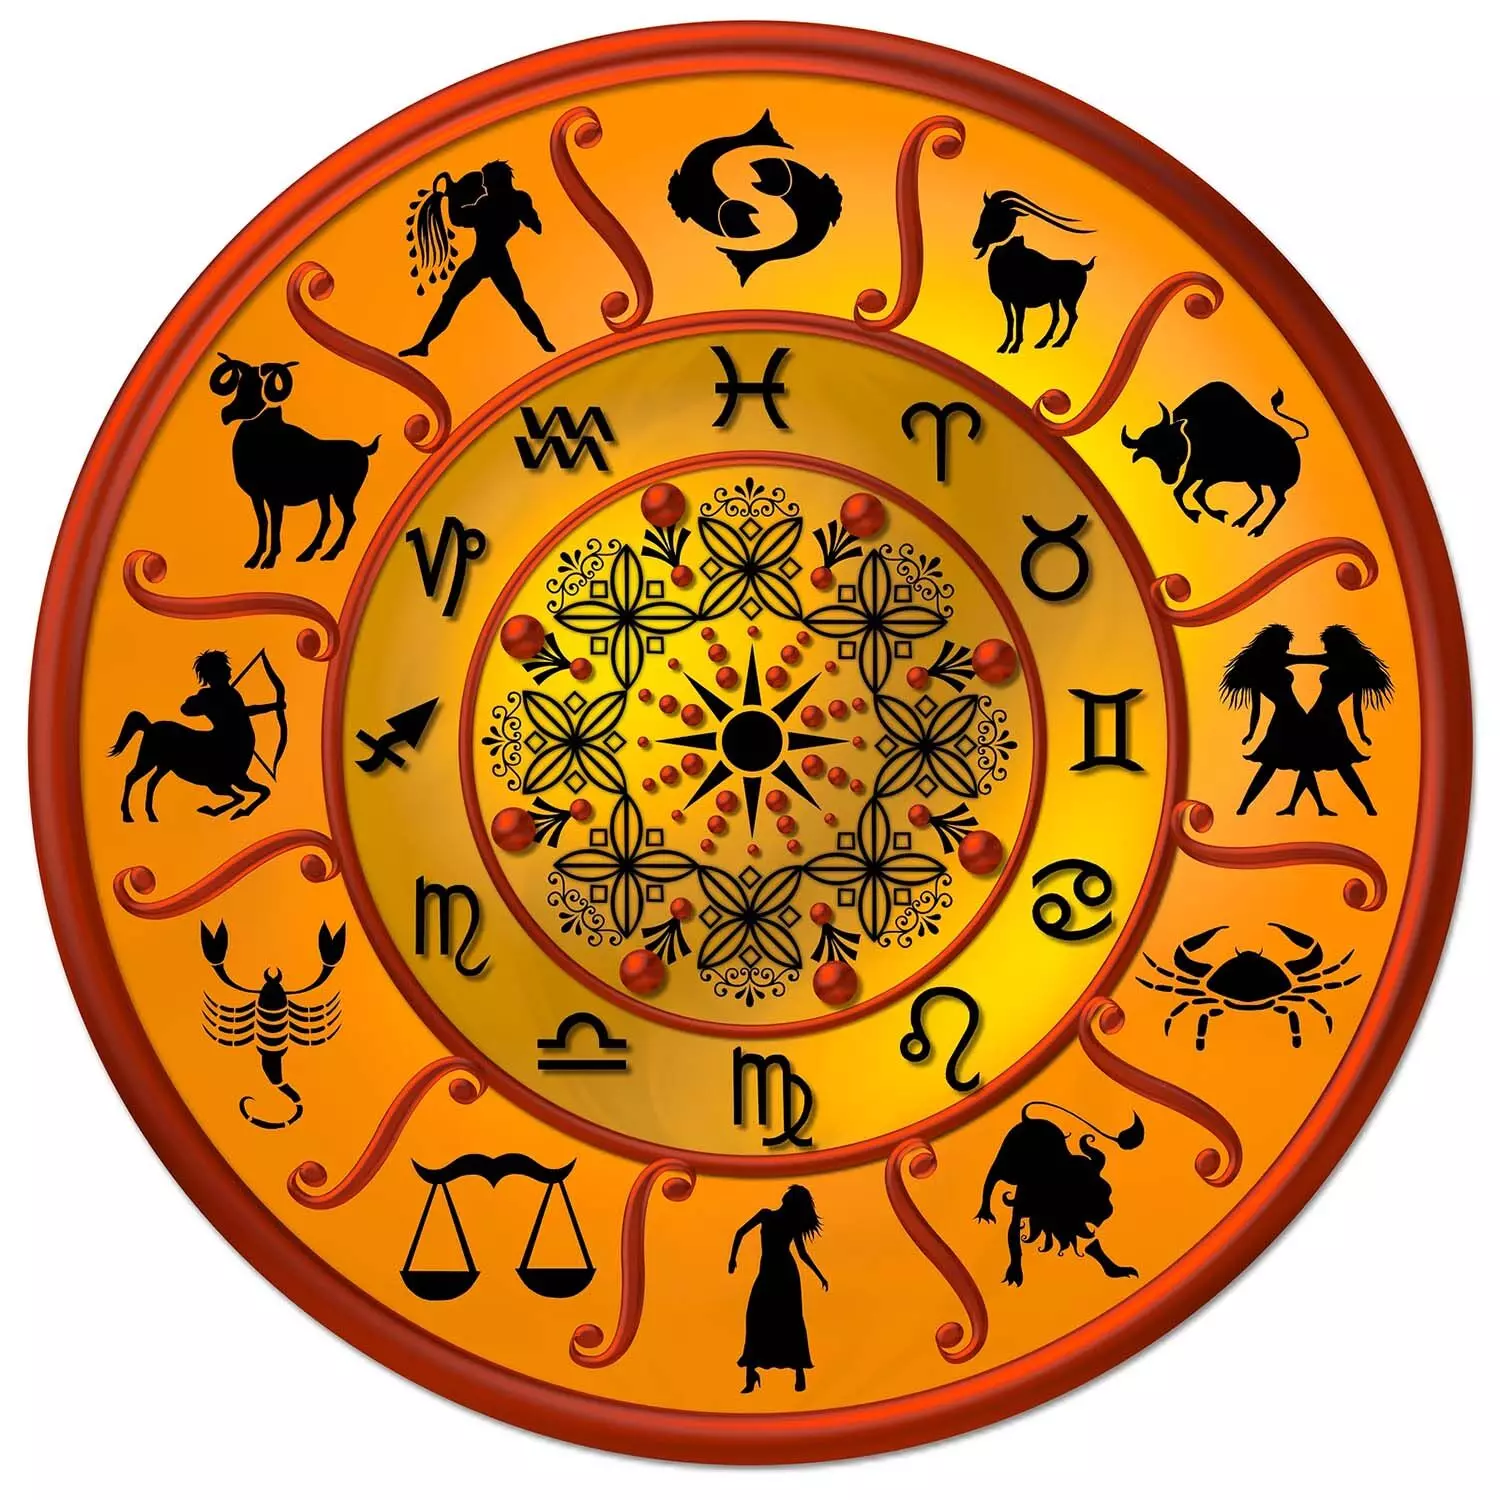 16 June – Know your todays horoscope